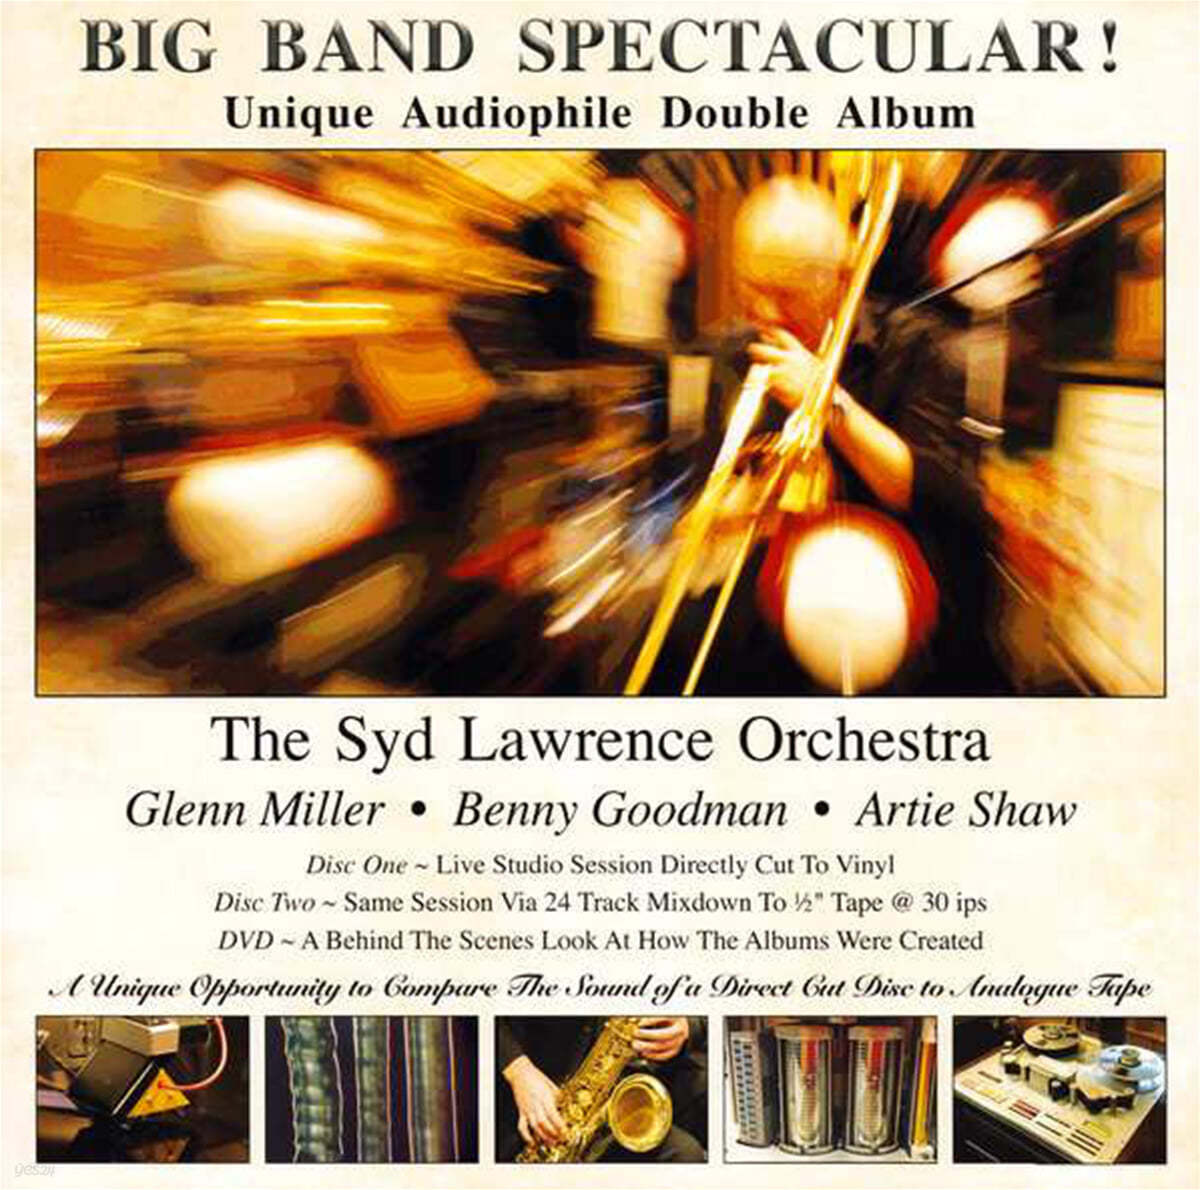 The Syd Lawrence Orchestra 빅 밴드 음악 모음집 (Big Band Spectacular!) [2LP] 